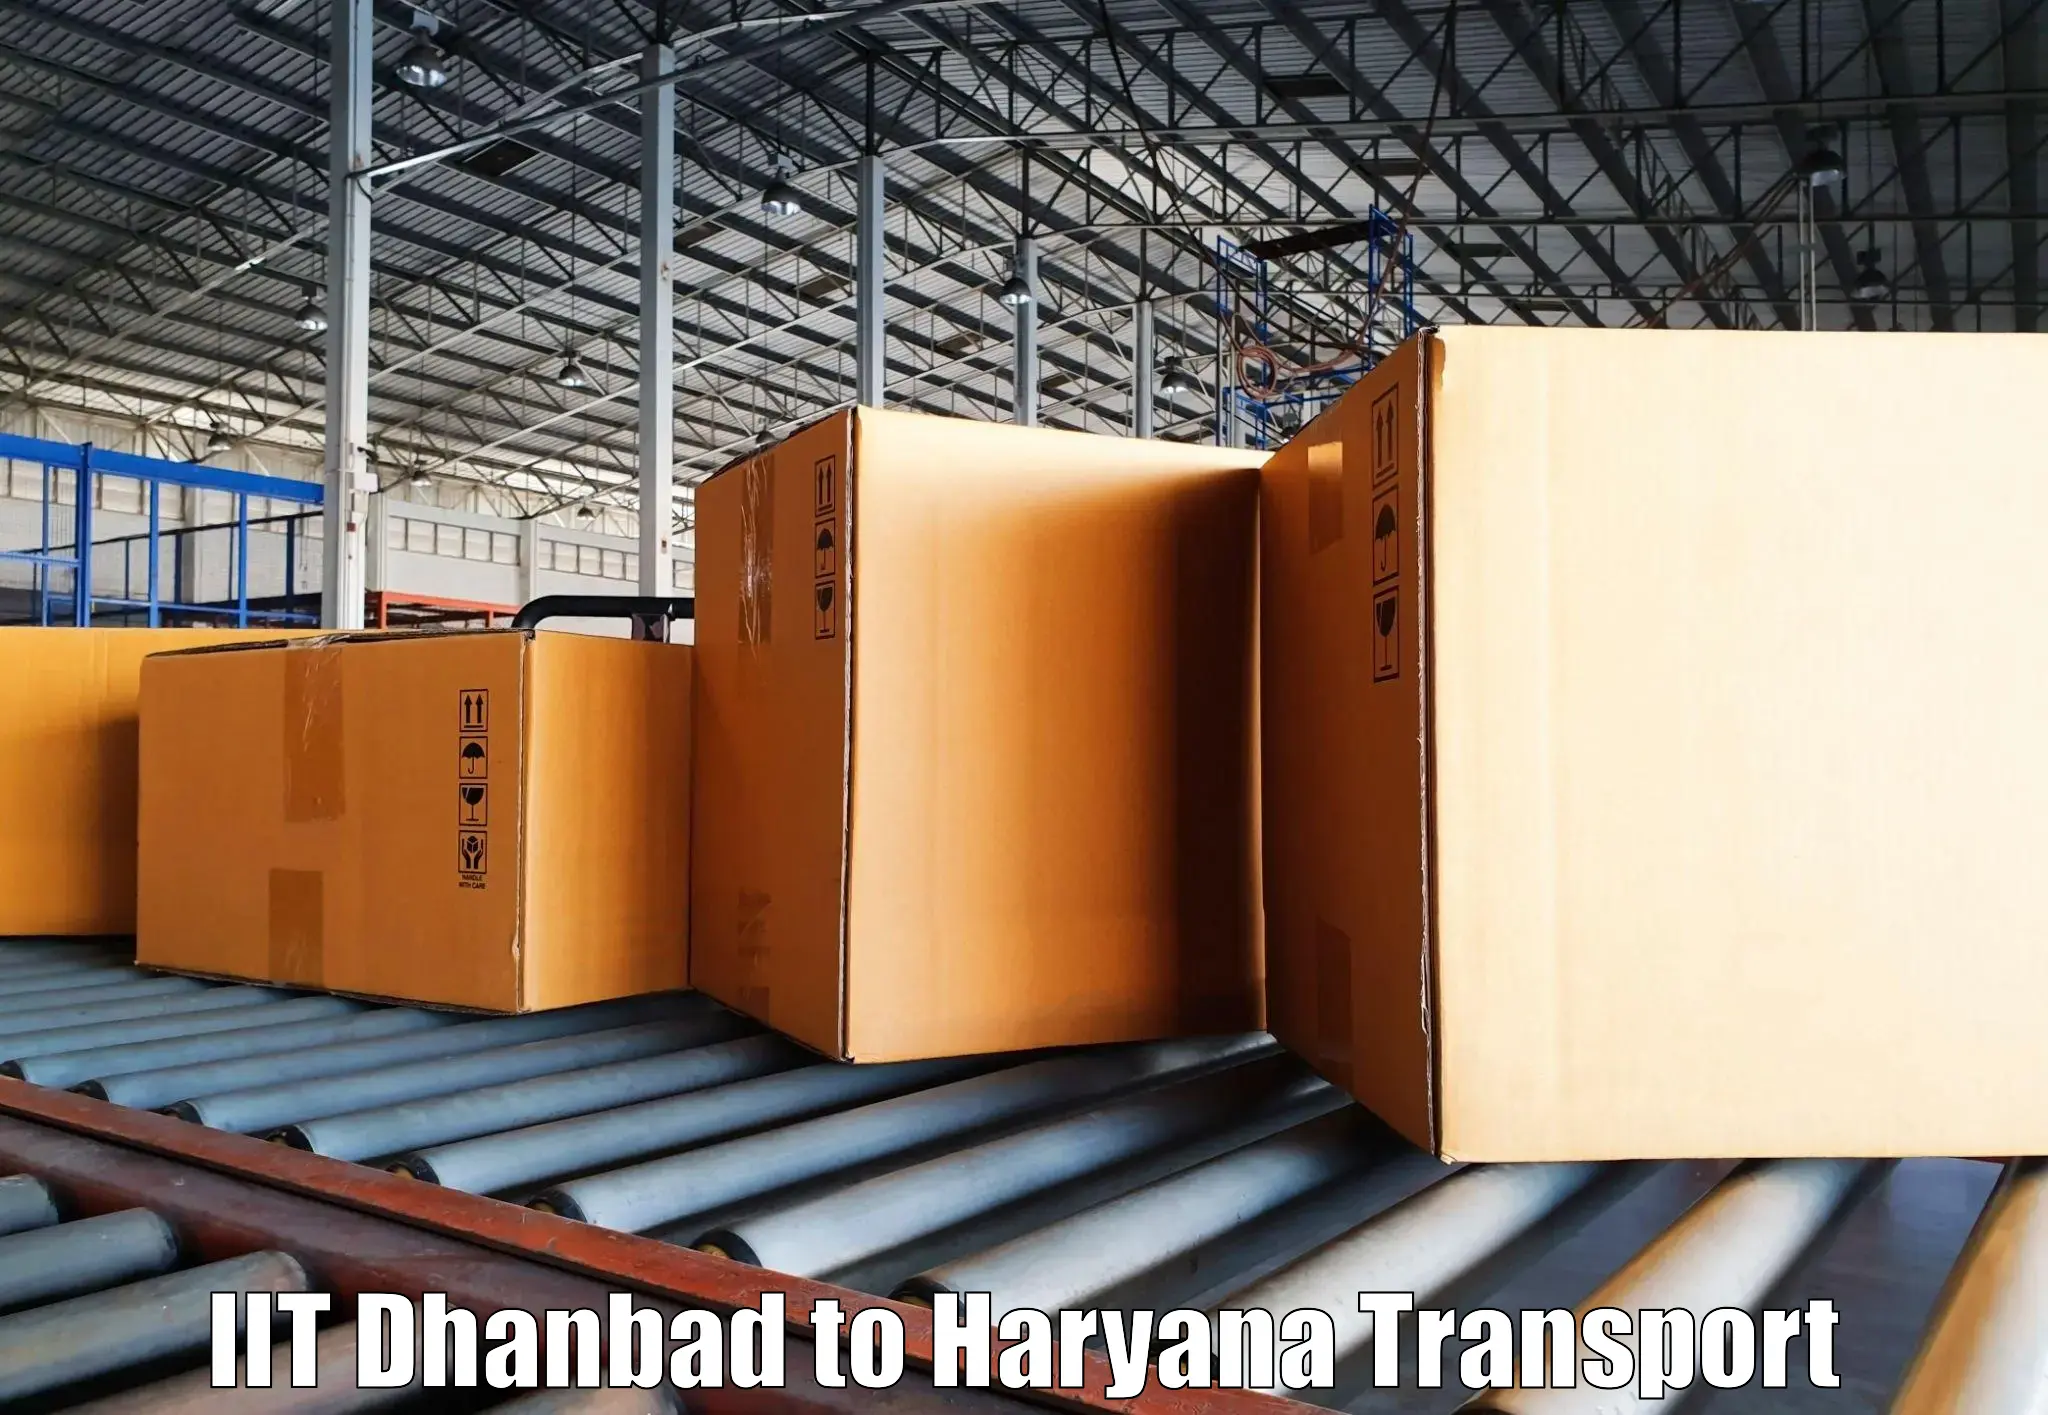 Nationwide transport services IIT Dhanbad to Jhajjar